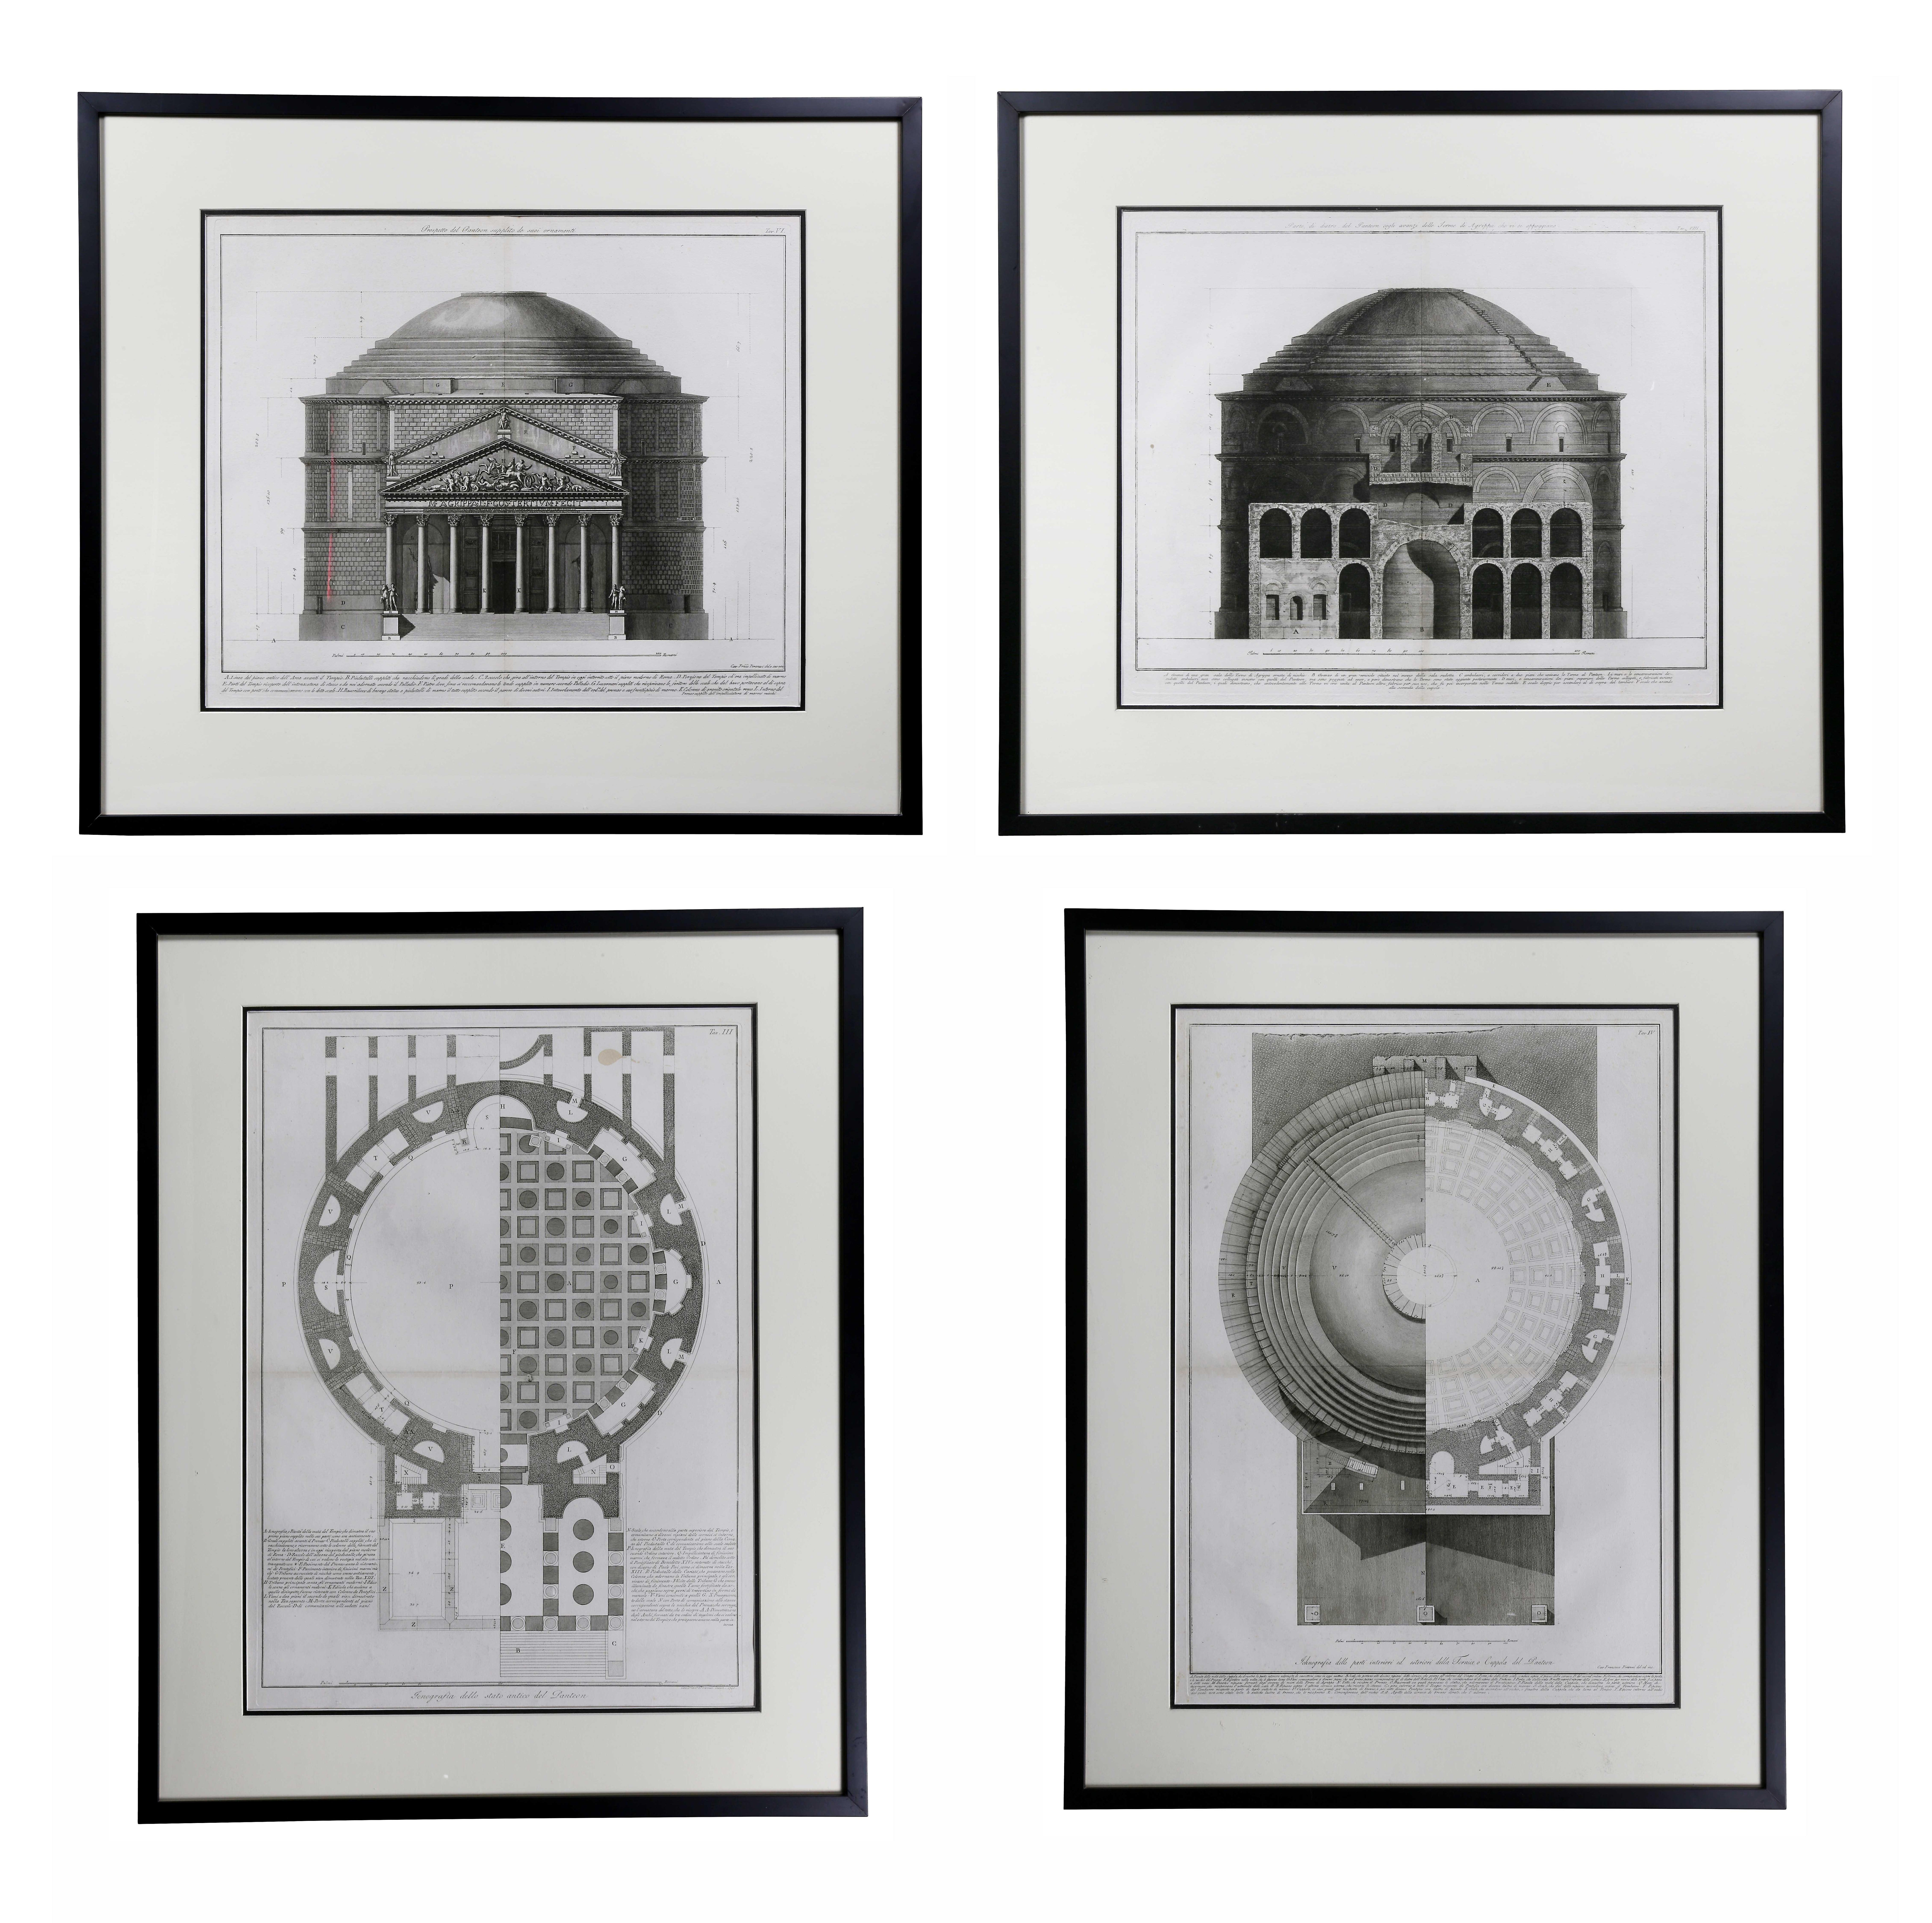 Each views of exterior and interior. Part of a series. Newly framed with archival matting and black frames, plexiglass. Each signed in plate.